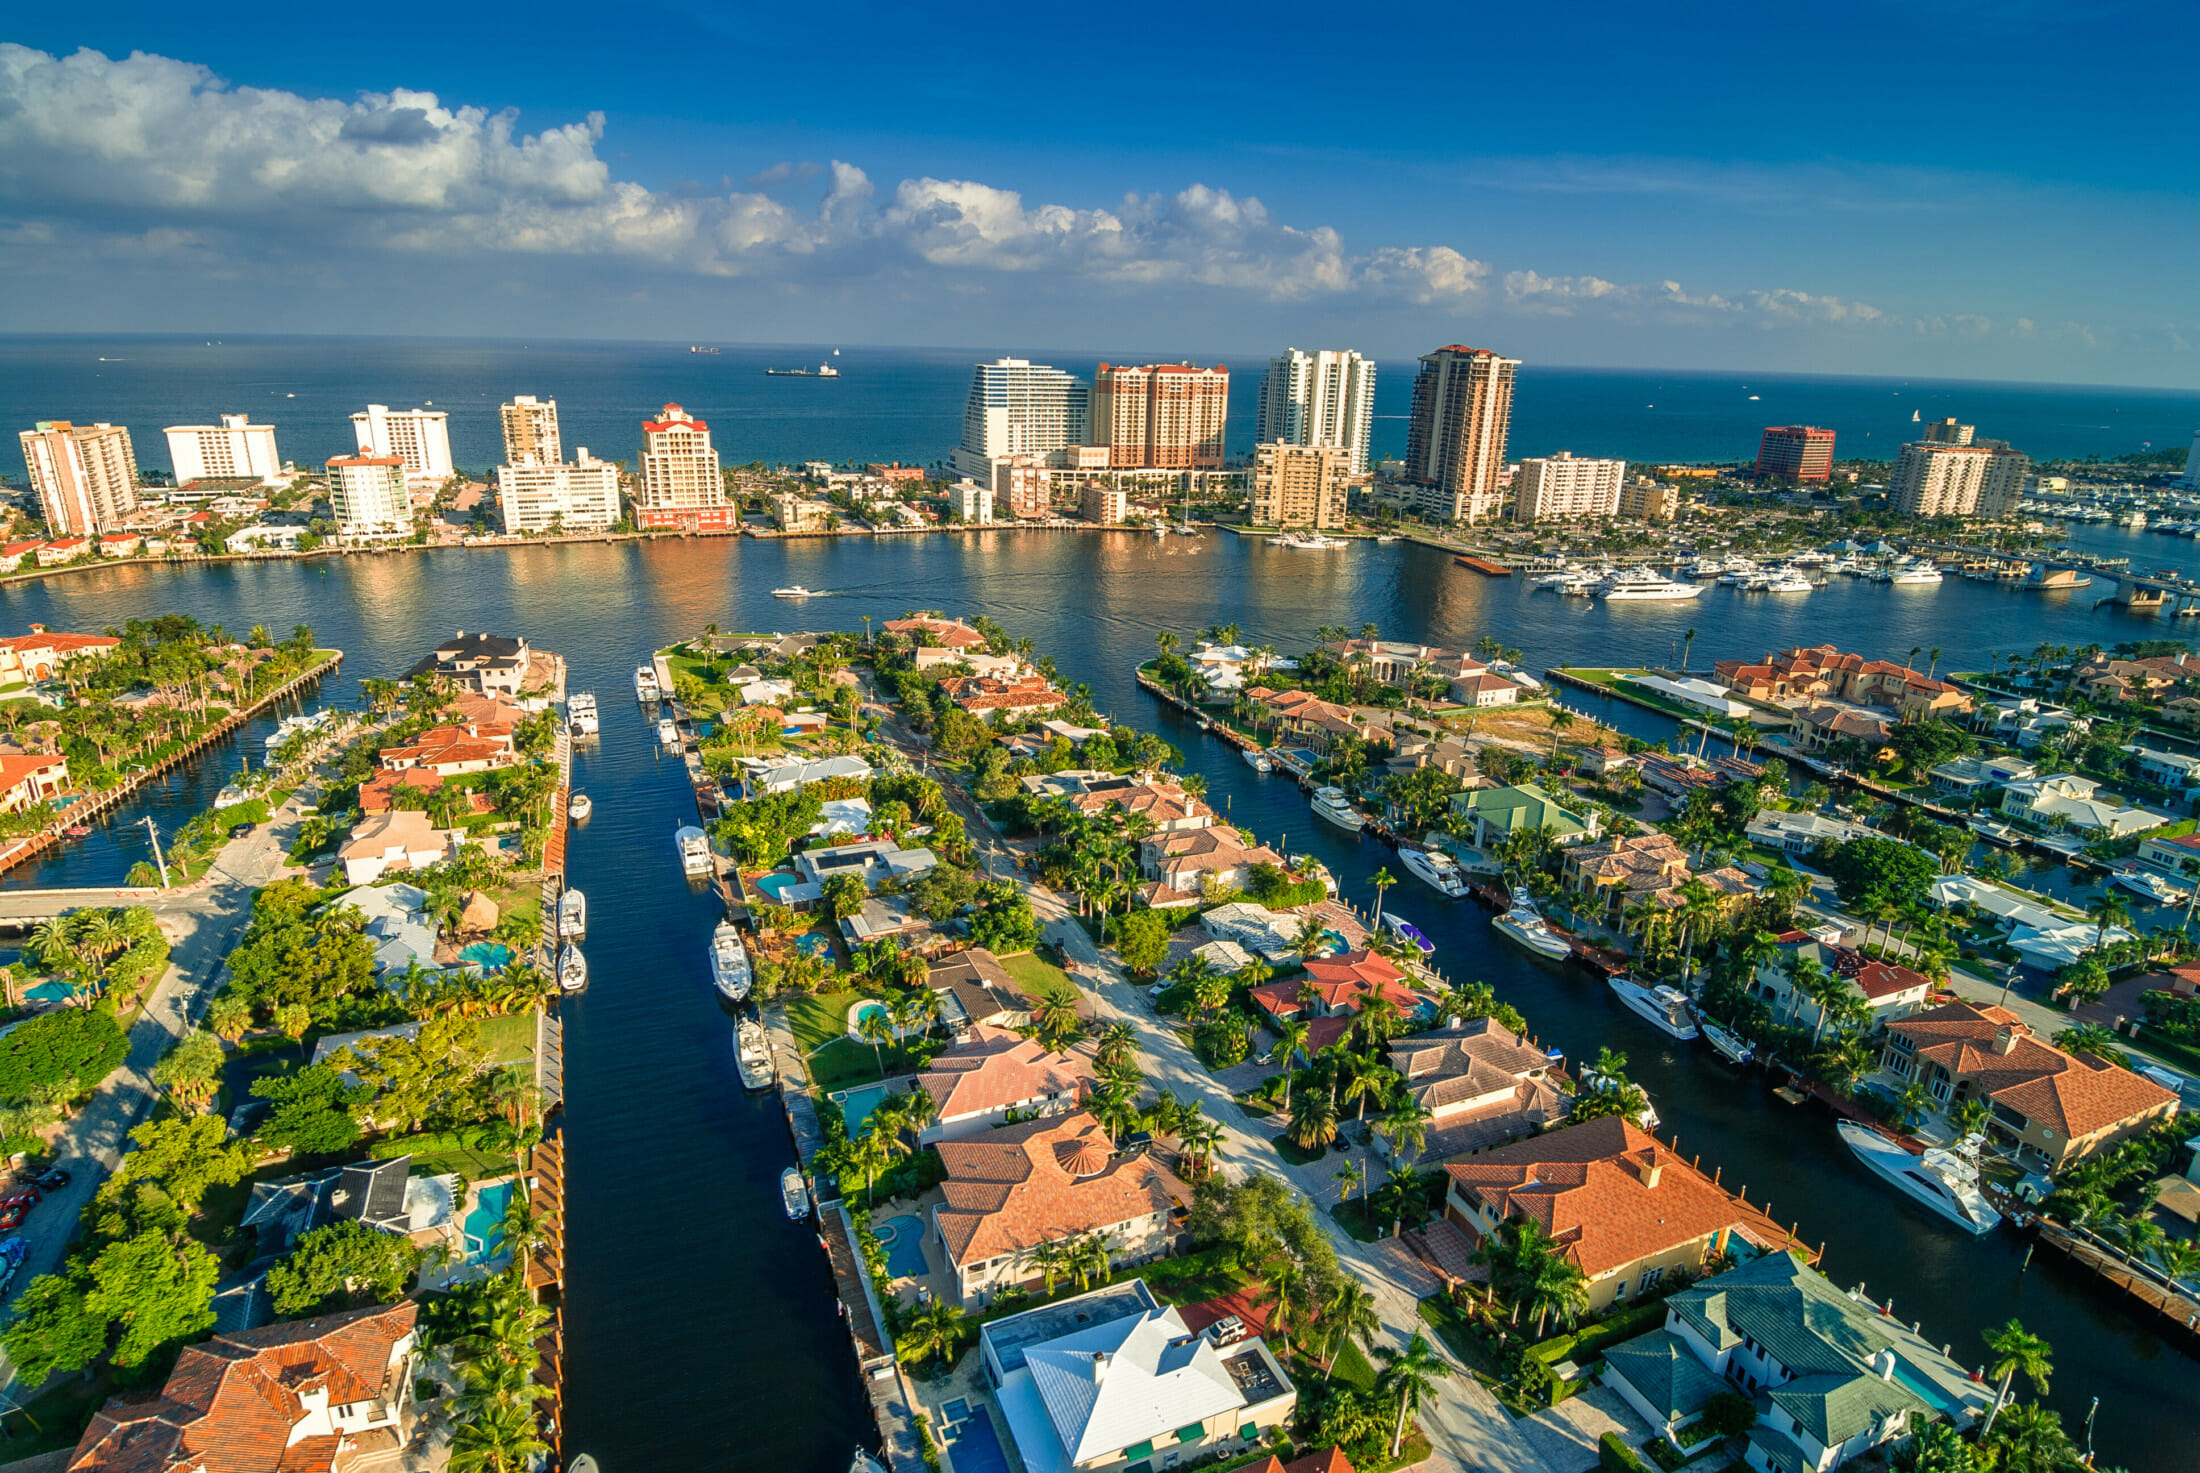 Fort Lauderdale, Florida | 50 Up-and-Coming Real Estate Markets to Watch in 2019 | Buildium